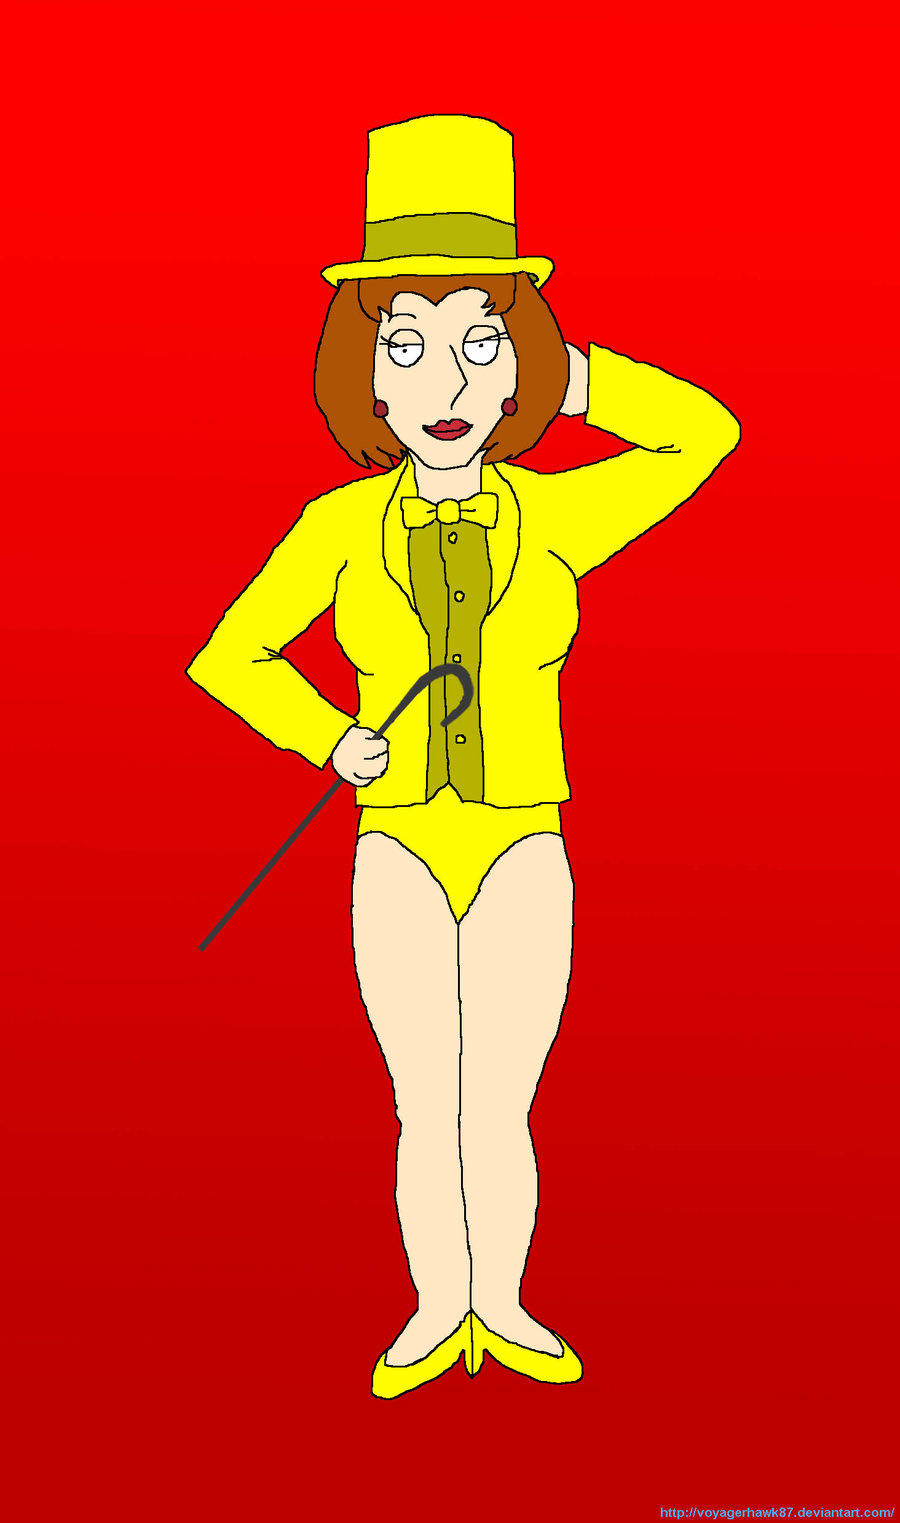 family guy diane simmons sexy diane simmons family guy diane simmons fami.....